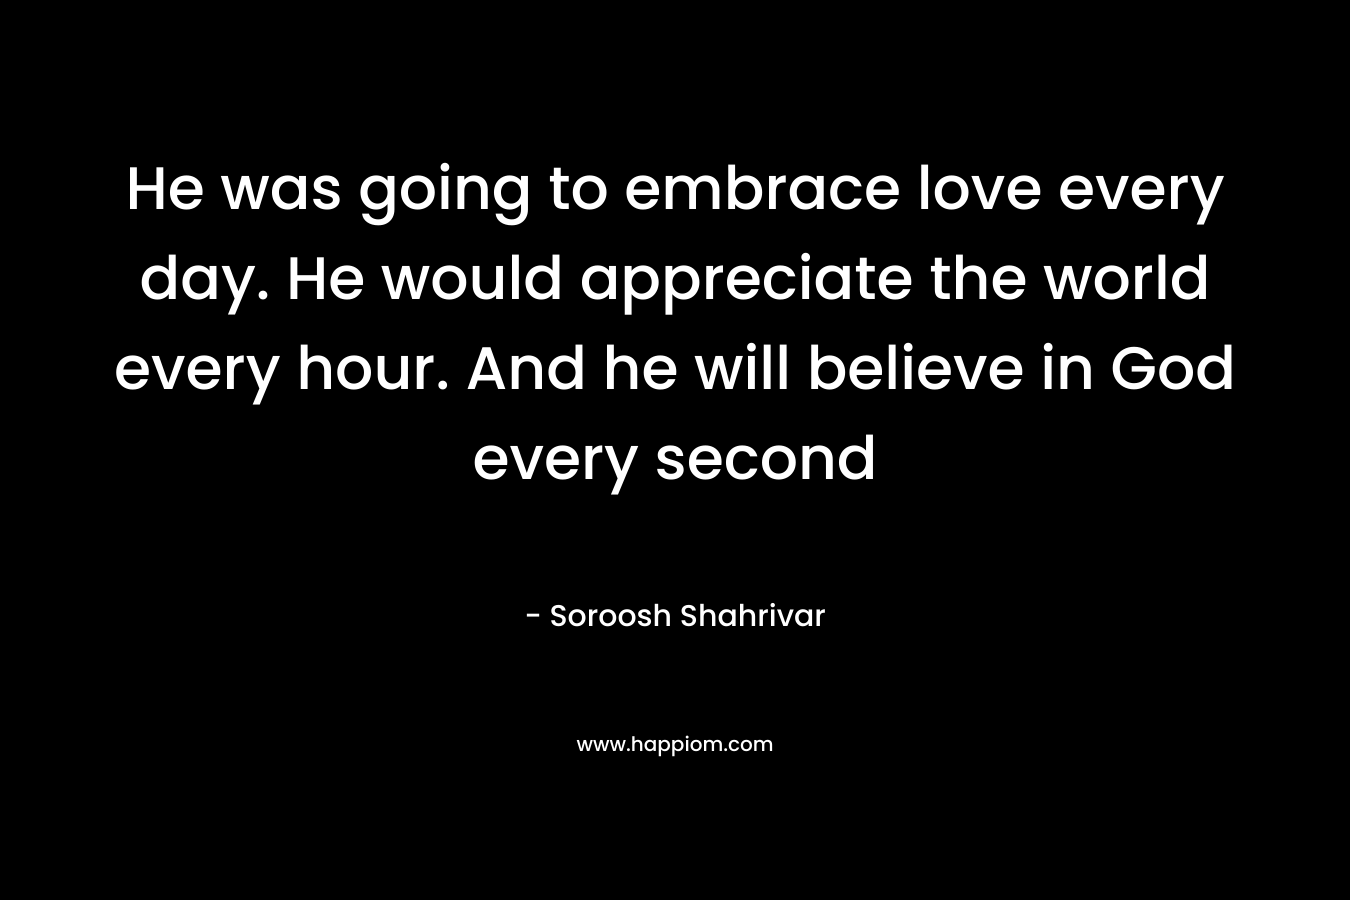 He was going to embrace love every day. He would appreciate the world every hour. And he will believe in God every second